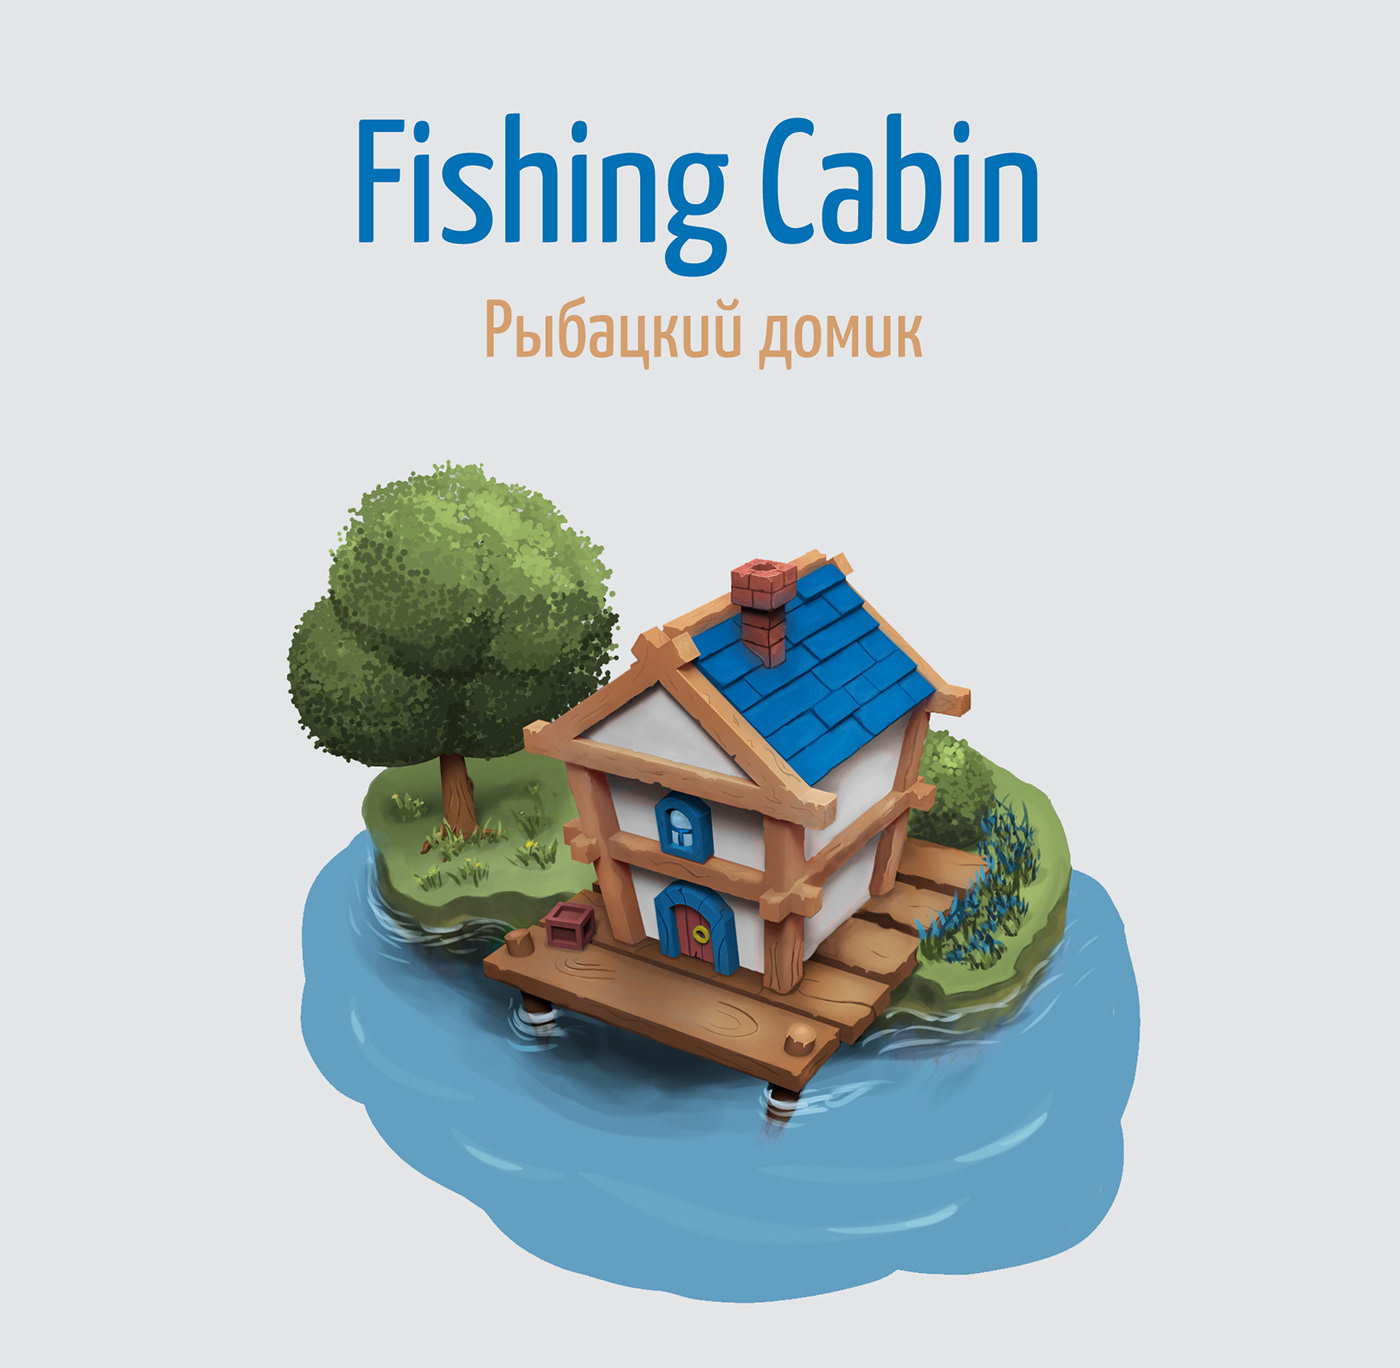 3D architecture building cabin concept Digital Art  fishing Game Art Isometric